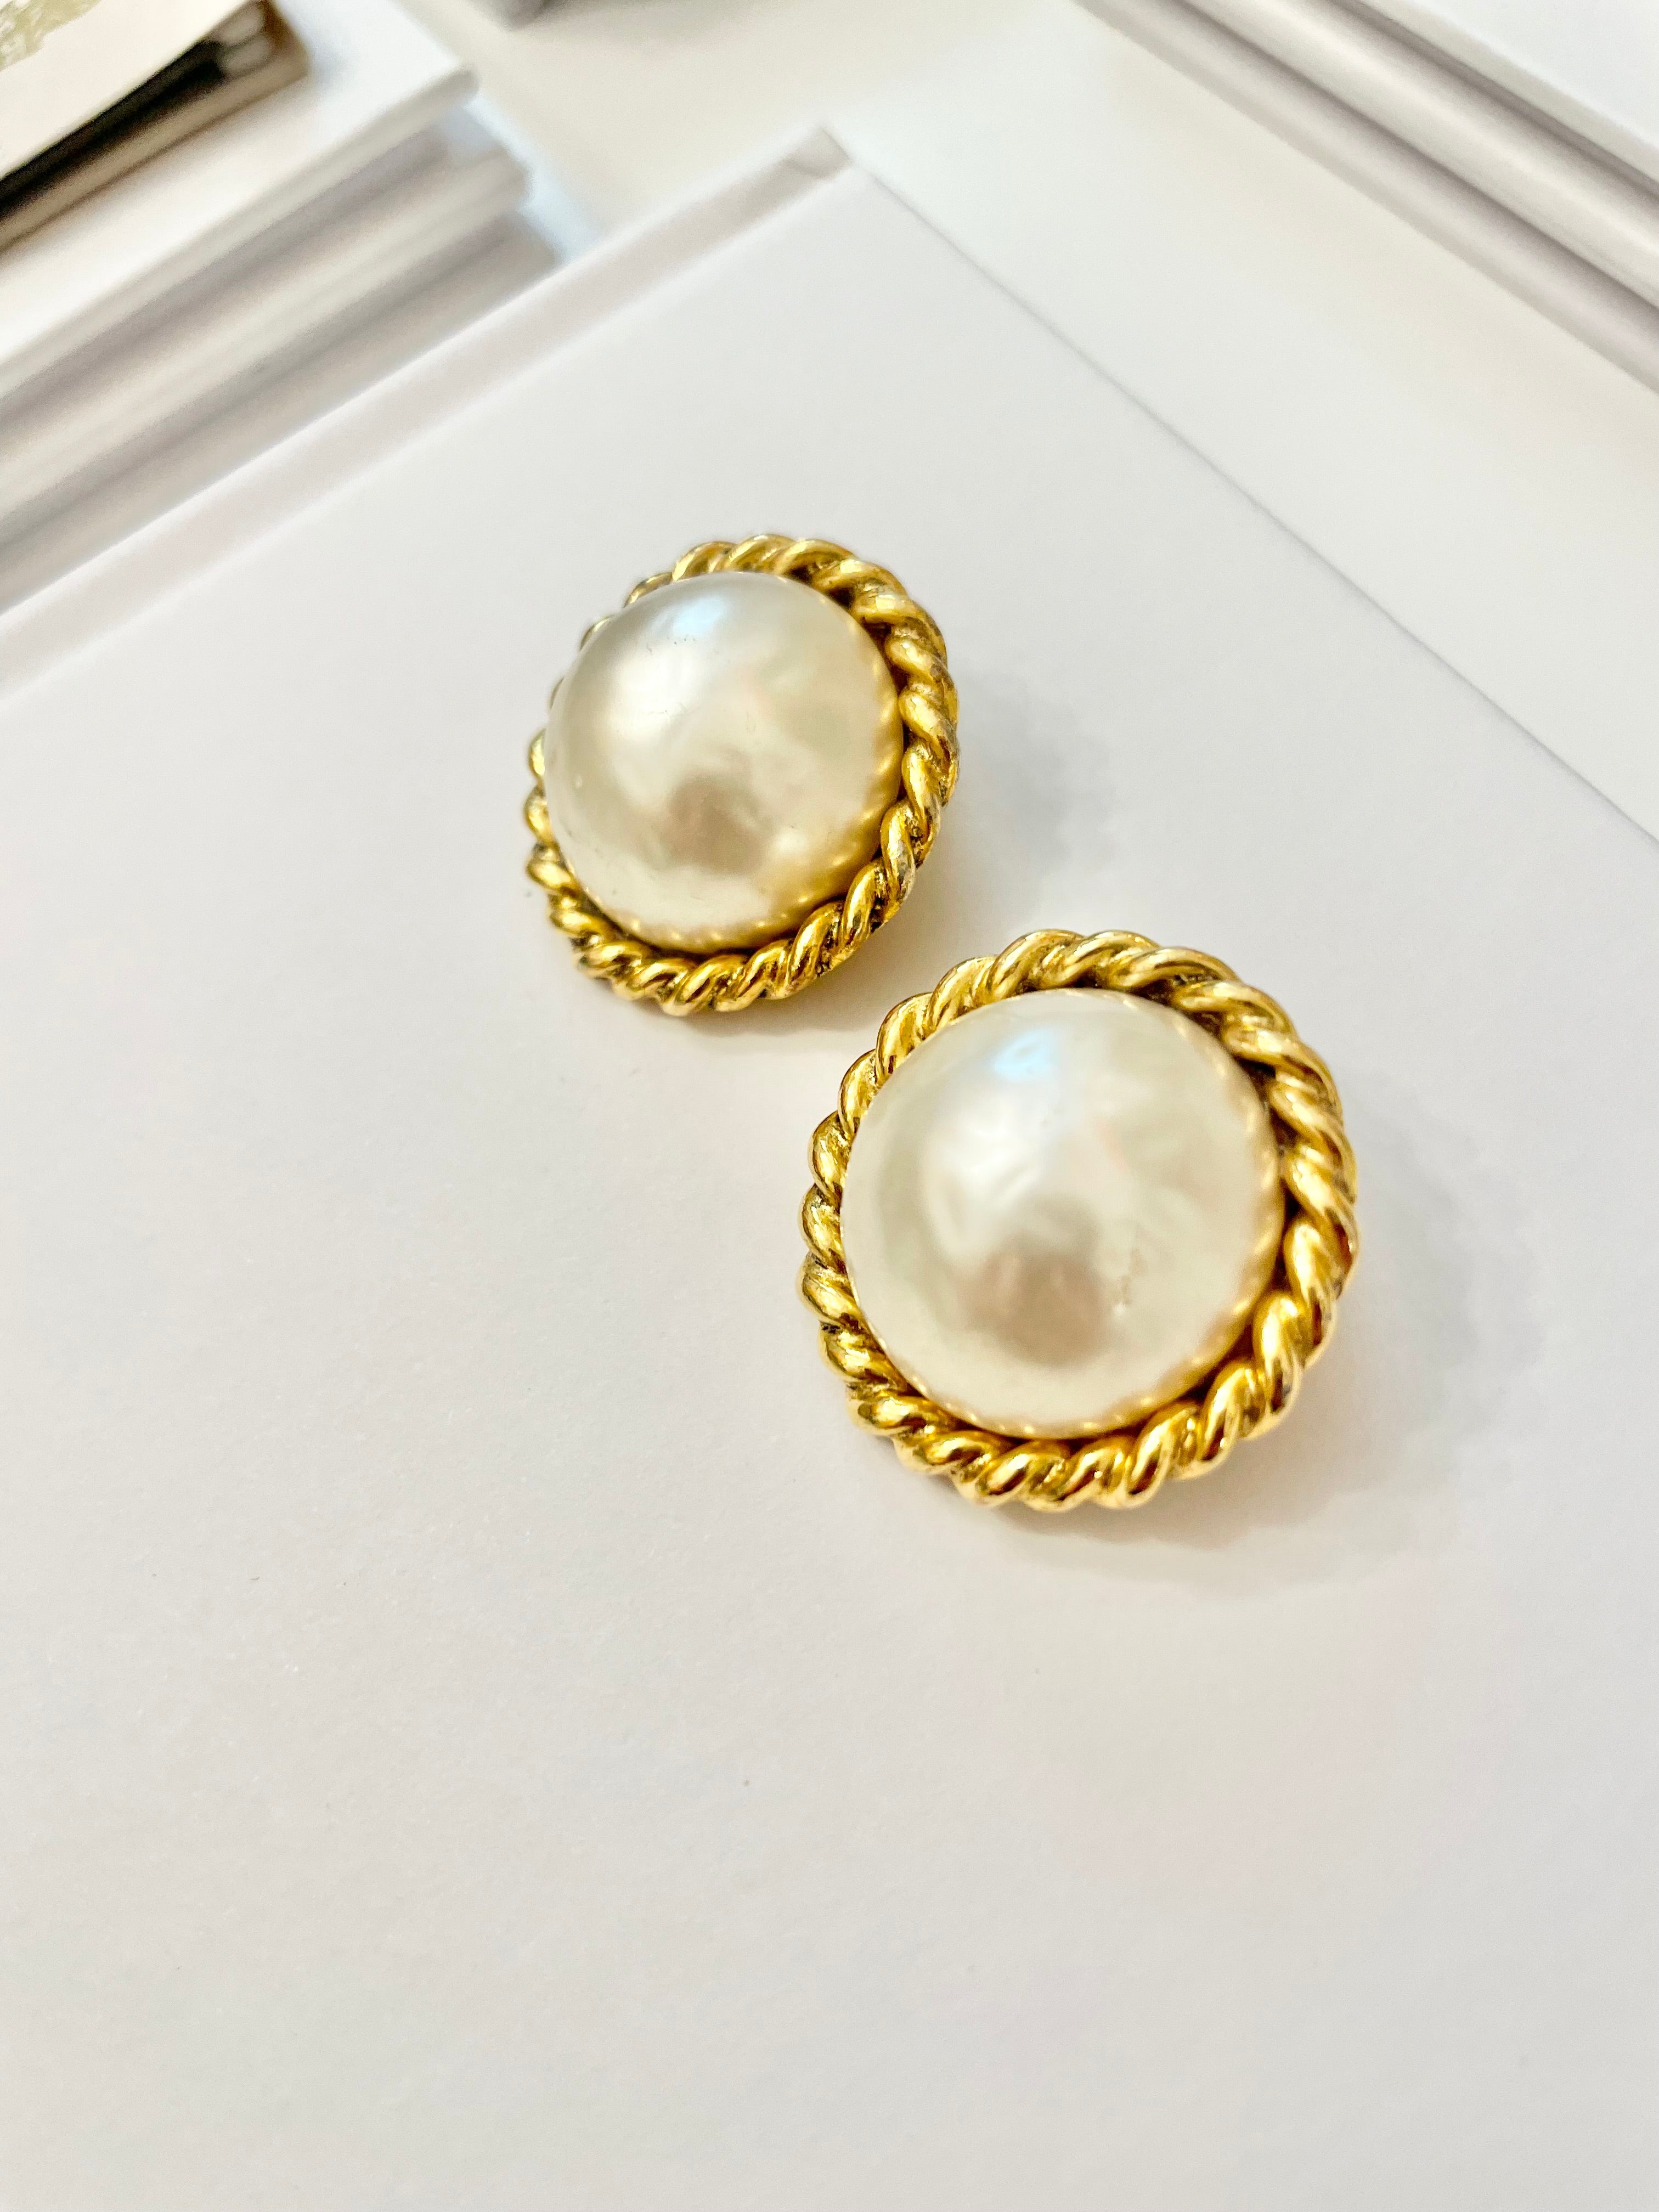 Truly classy Carol Lee stunning pearl clip earrings, framed in a braided gold! Timeless design..